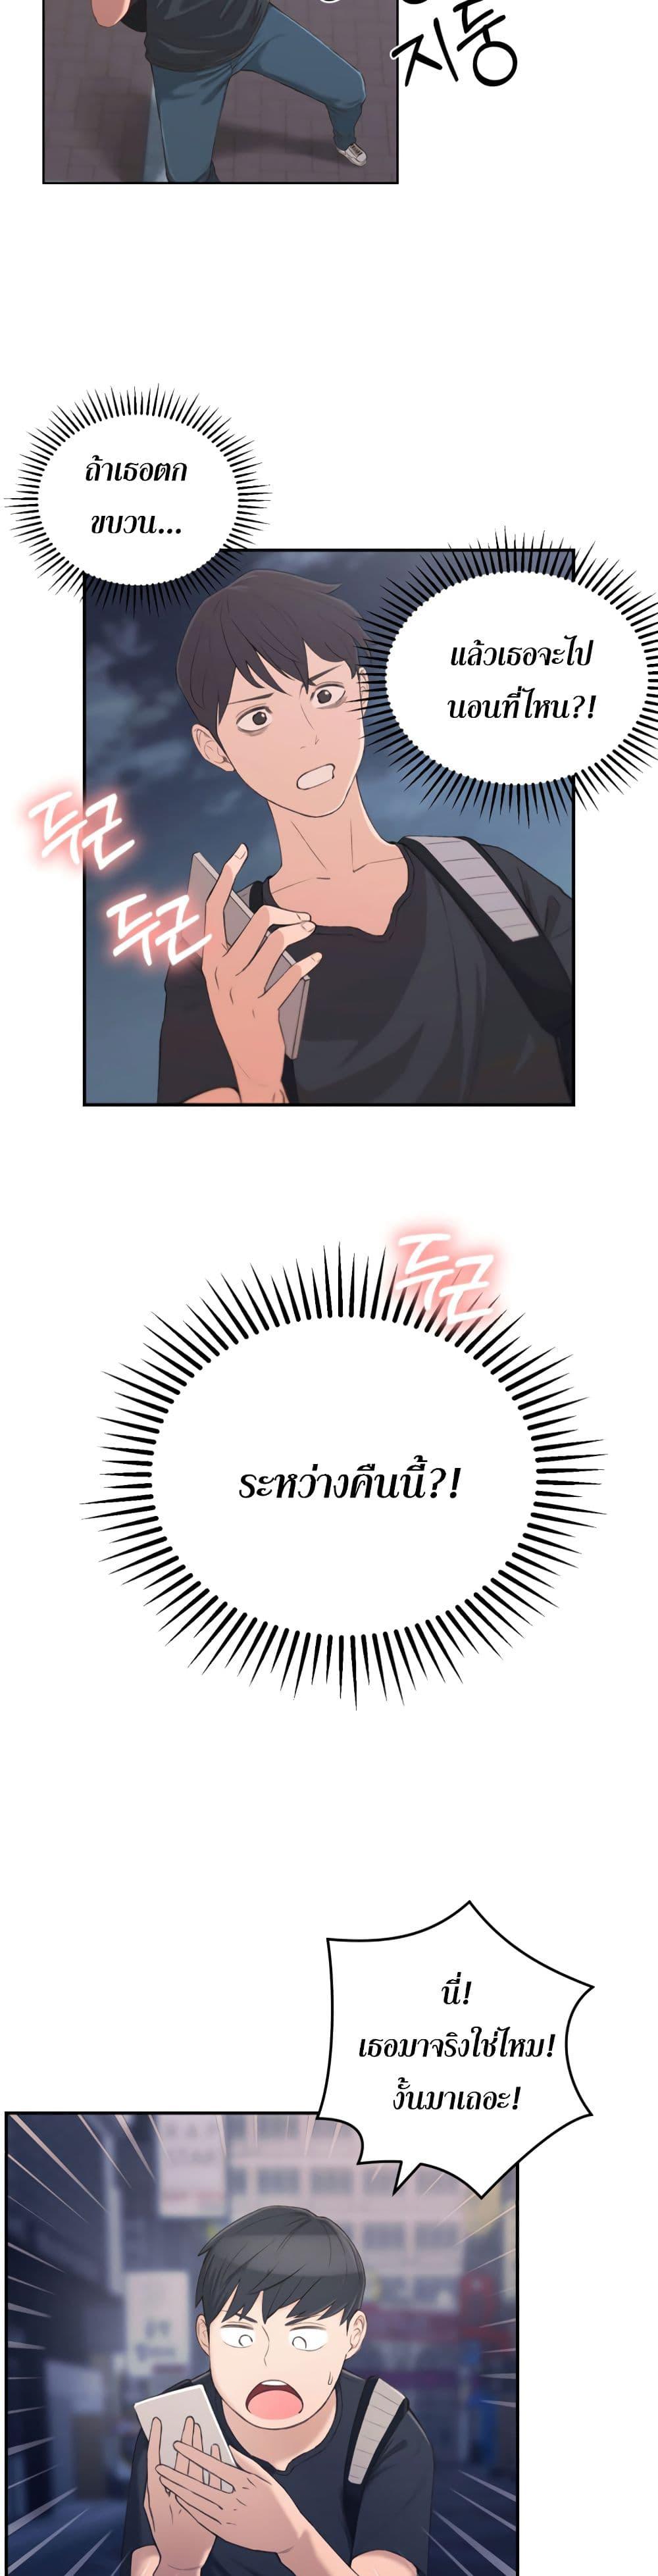 A Knowing Sister 1 ภาพ 39